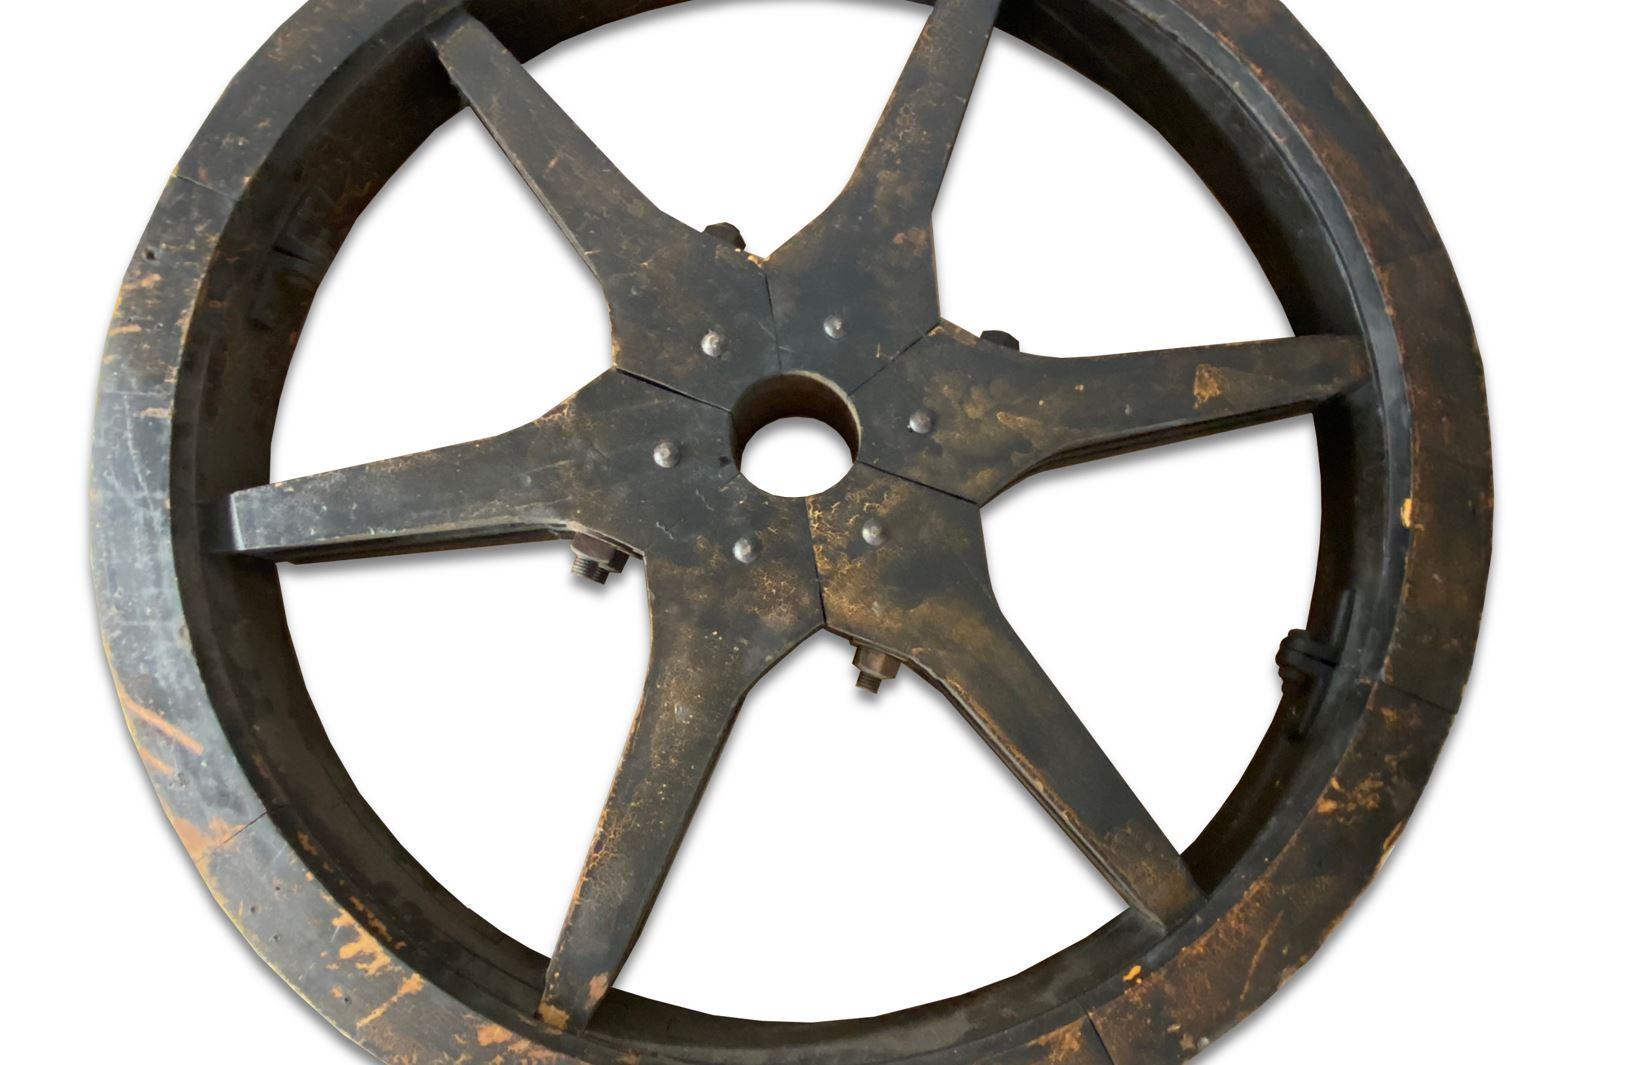 Nice vintage foundry pattern in the form of a wood wheel with 6 large spokes. This industrial wood form has the original nuts and bolts that join the sprocket and the wheel. Great display piece for that industrial look.

Property from esteemed